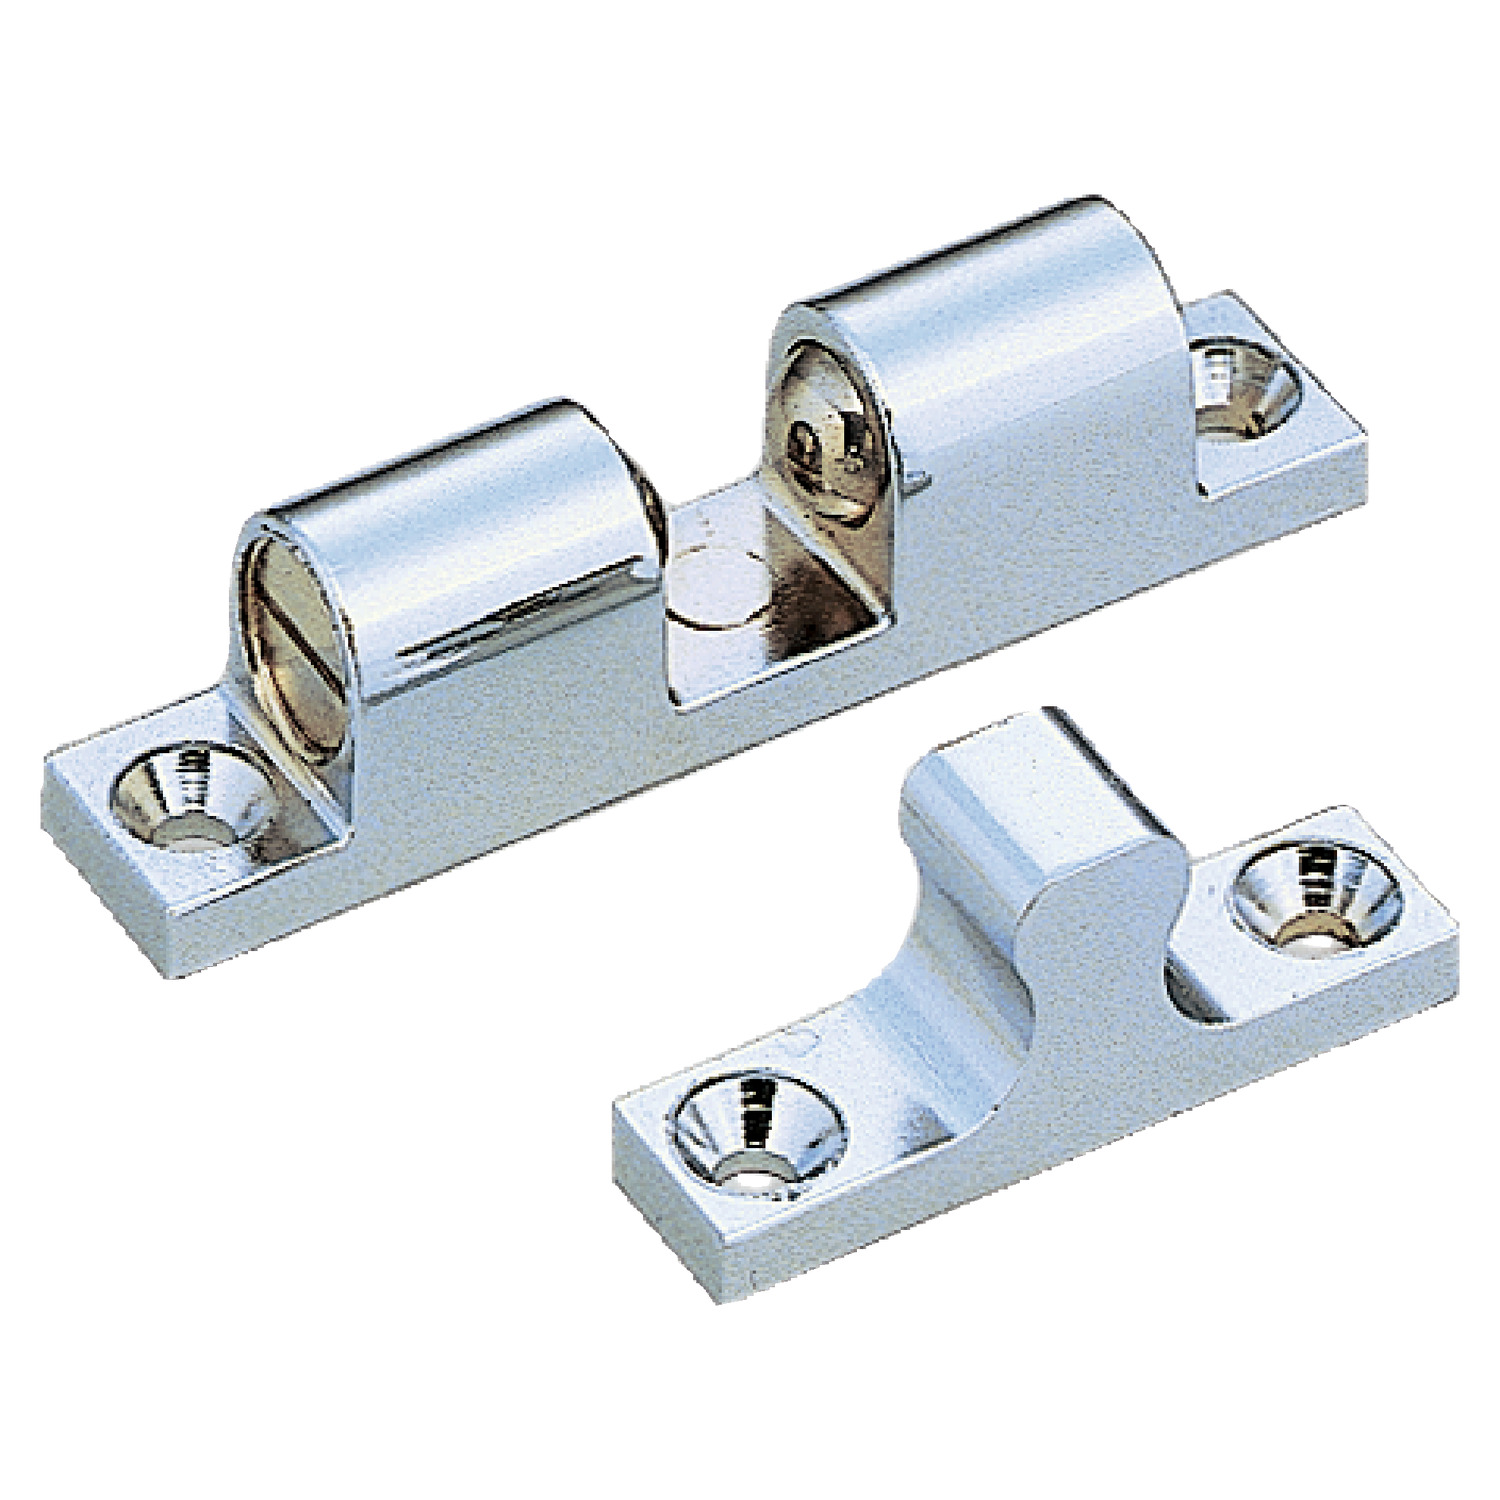 Tension Catches Tension catches provide higher holding forces and are used for securing larger cabinets or doors for longer periods. Available in stainless steel and die-cast zinc.